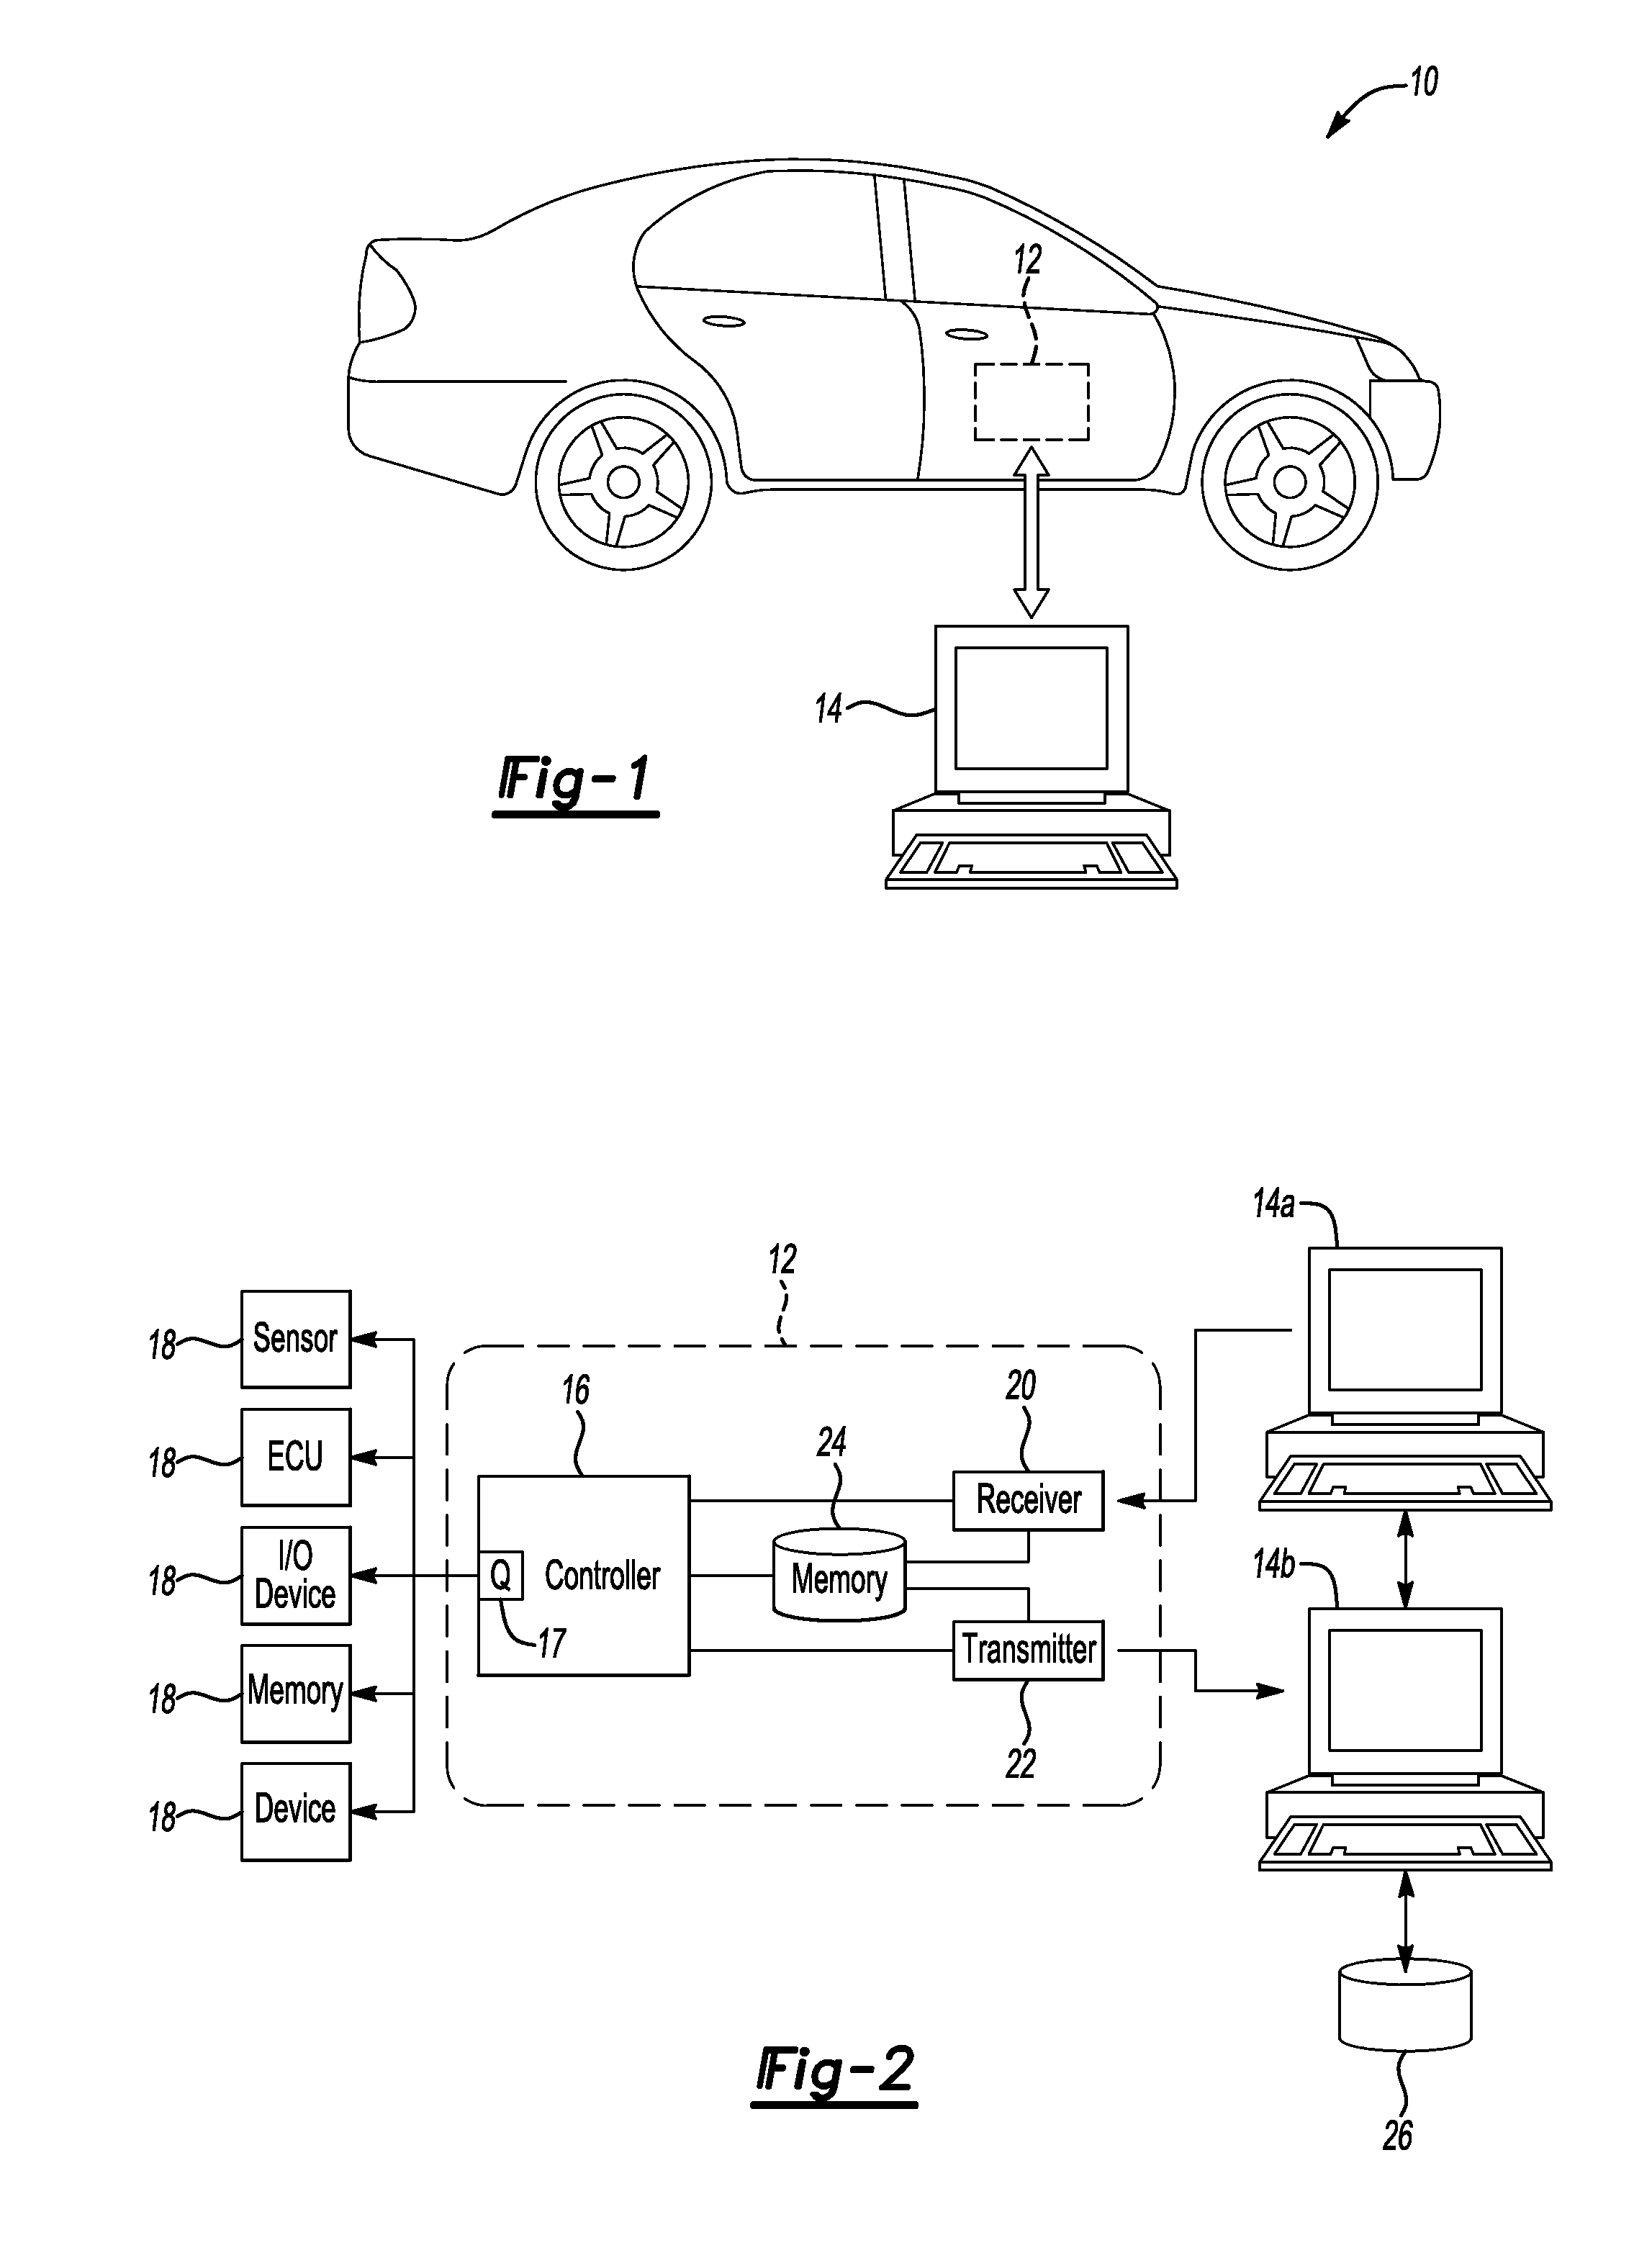 System and method for managing a vehicle component using temporary on-board data storage